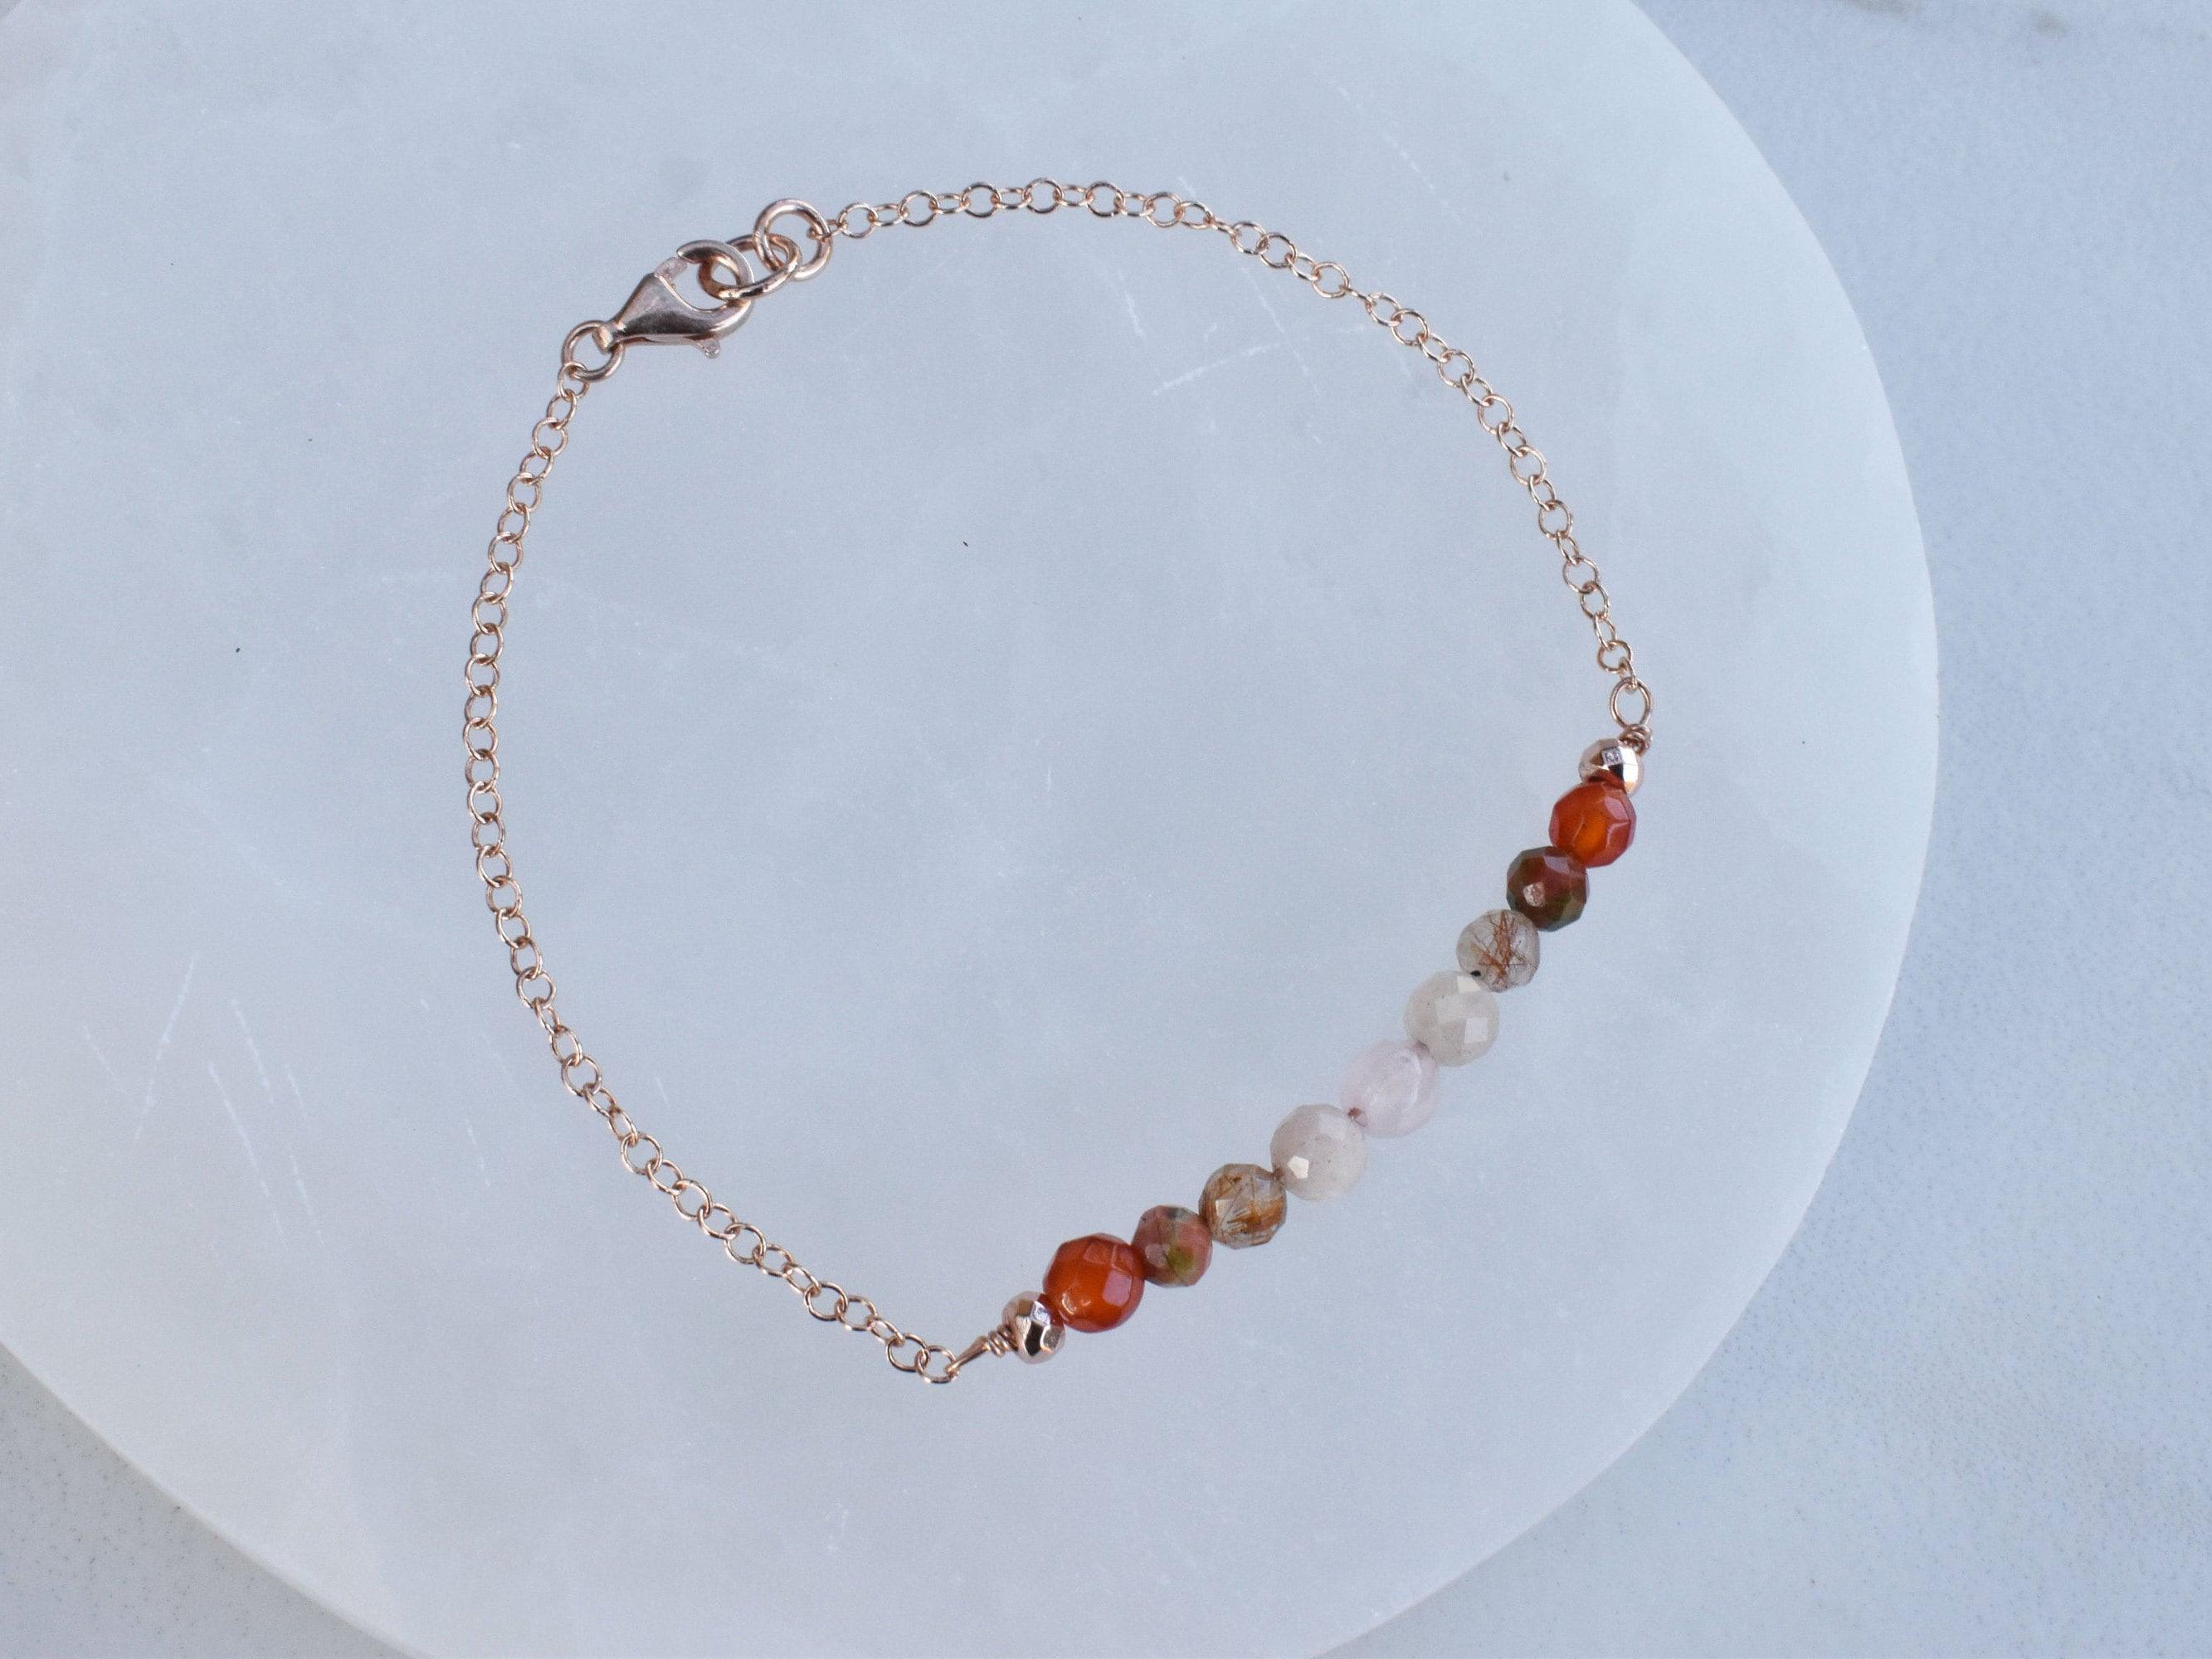 Dainty healing gemstone bracelet to help you on your fertility, and pregnancy journey. It features the top fertility crystals such as peach moonstone, unakite, carnelian, rose quartz and rutilated quartz.